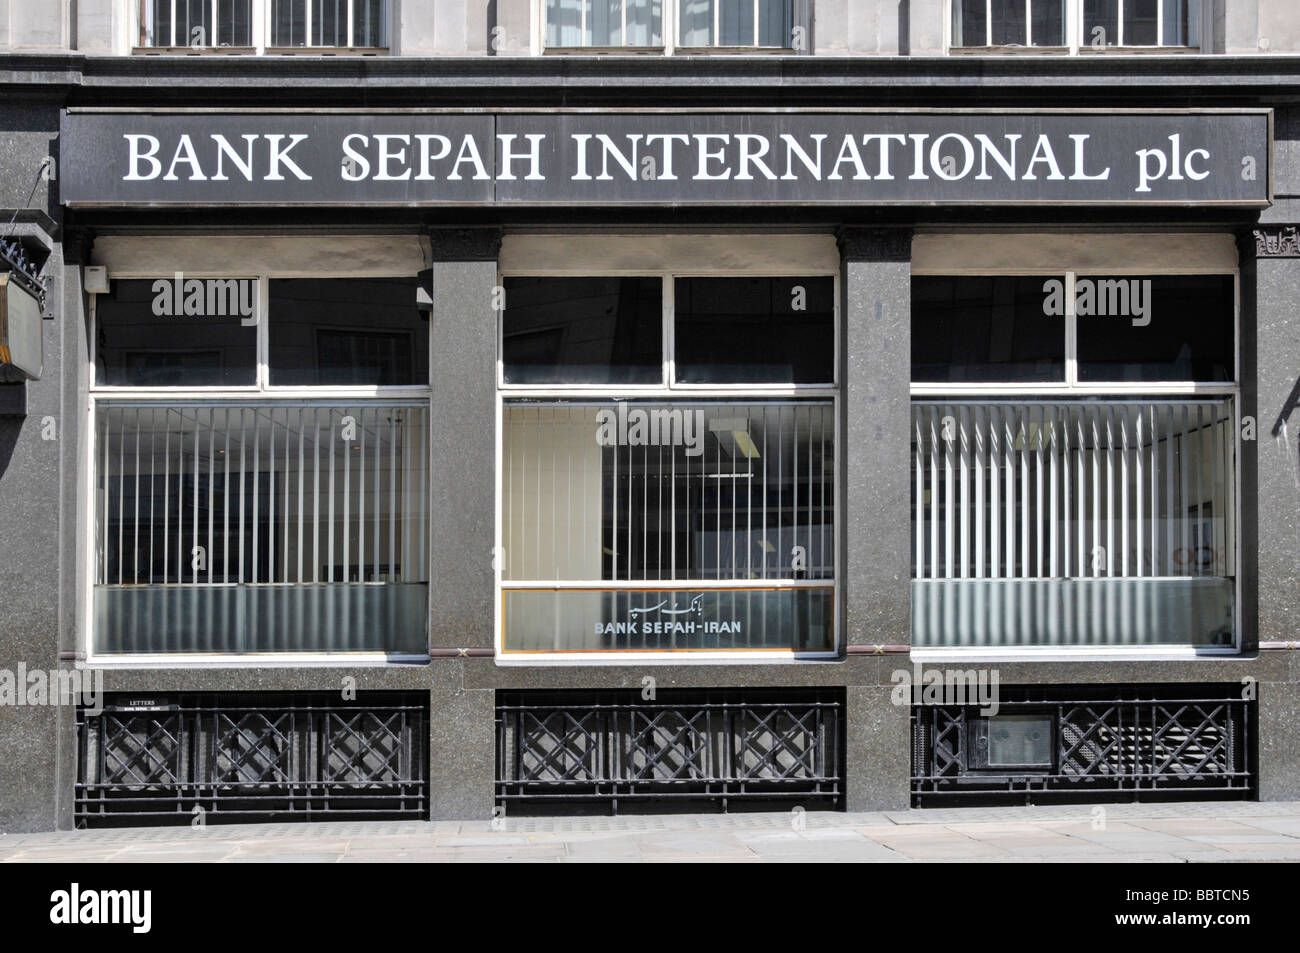 Foreign branch of Bank Sepah International plc a subsidiary of the Iranian Bank Sepah front facade of premises in the City of London England UK Stock Photo